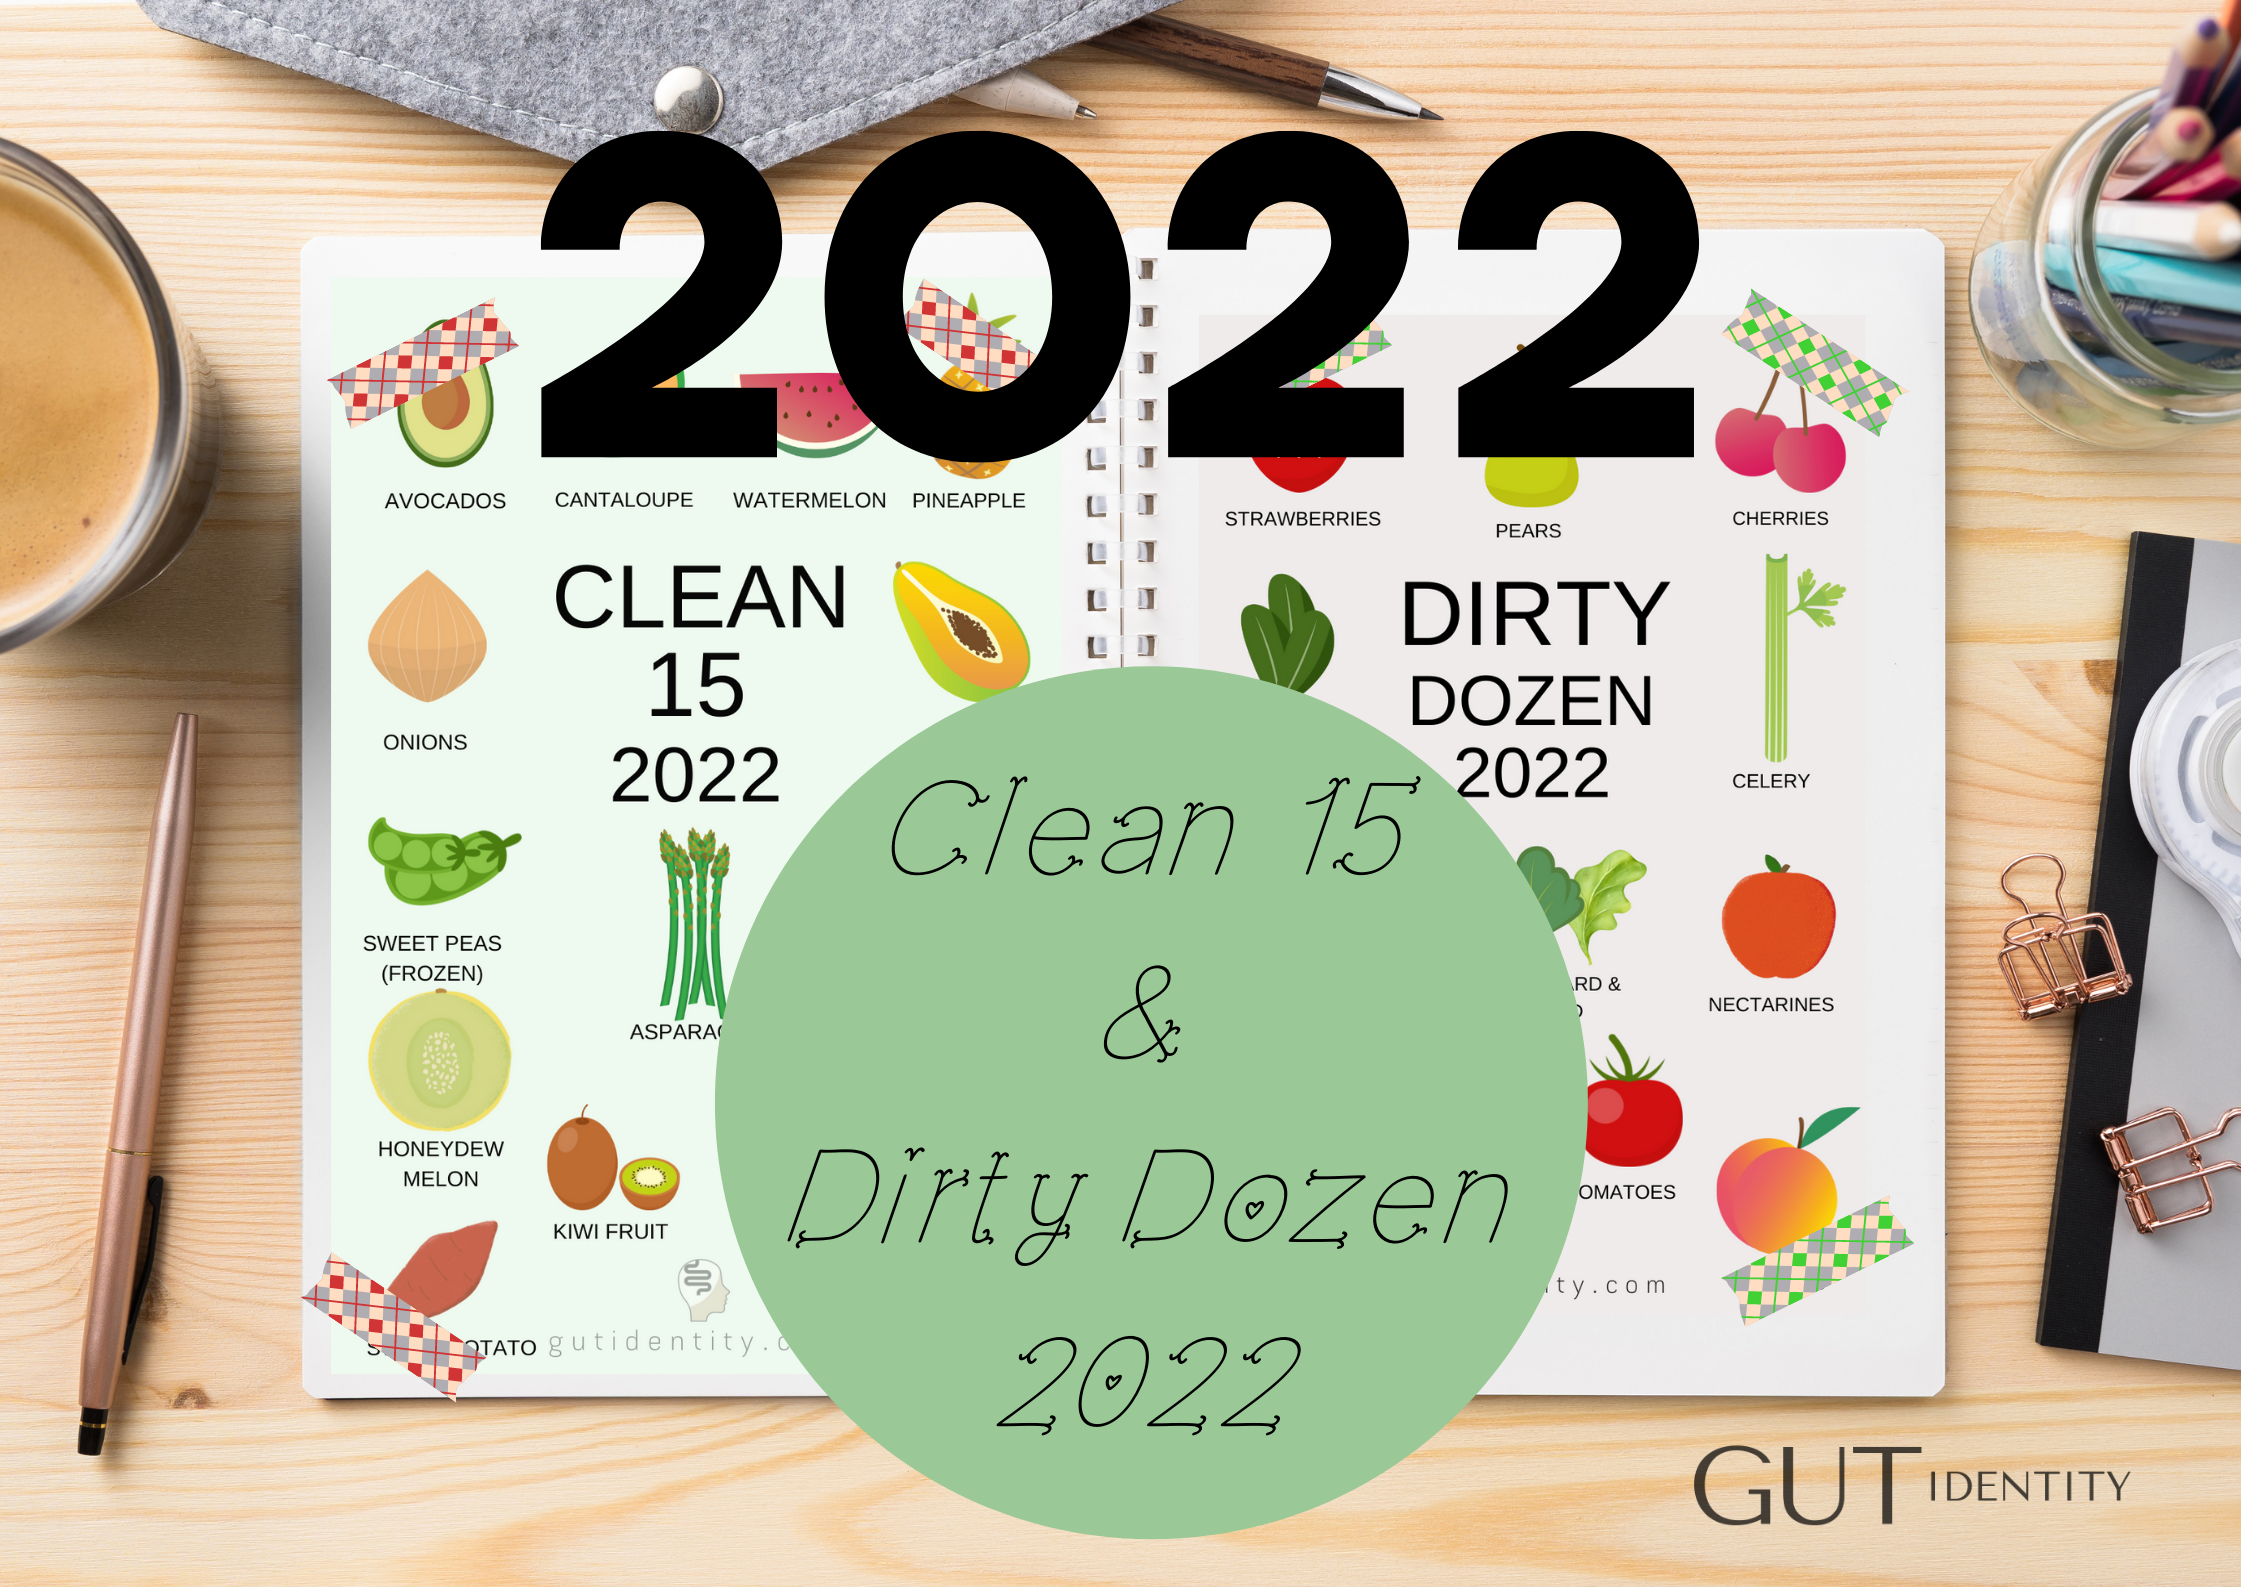 The 2022 Dirty Dozen and Clean 15 Lists available on Etsy by Gutidentity